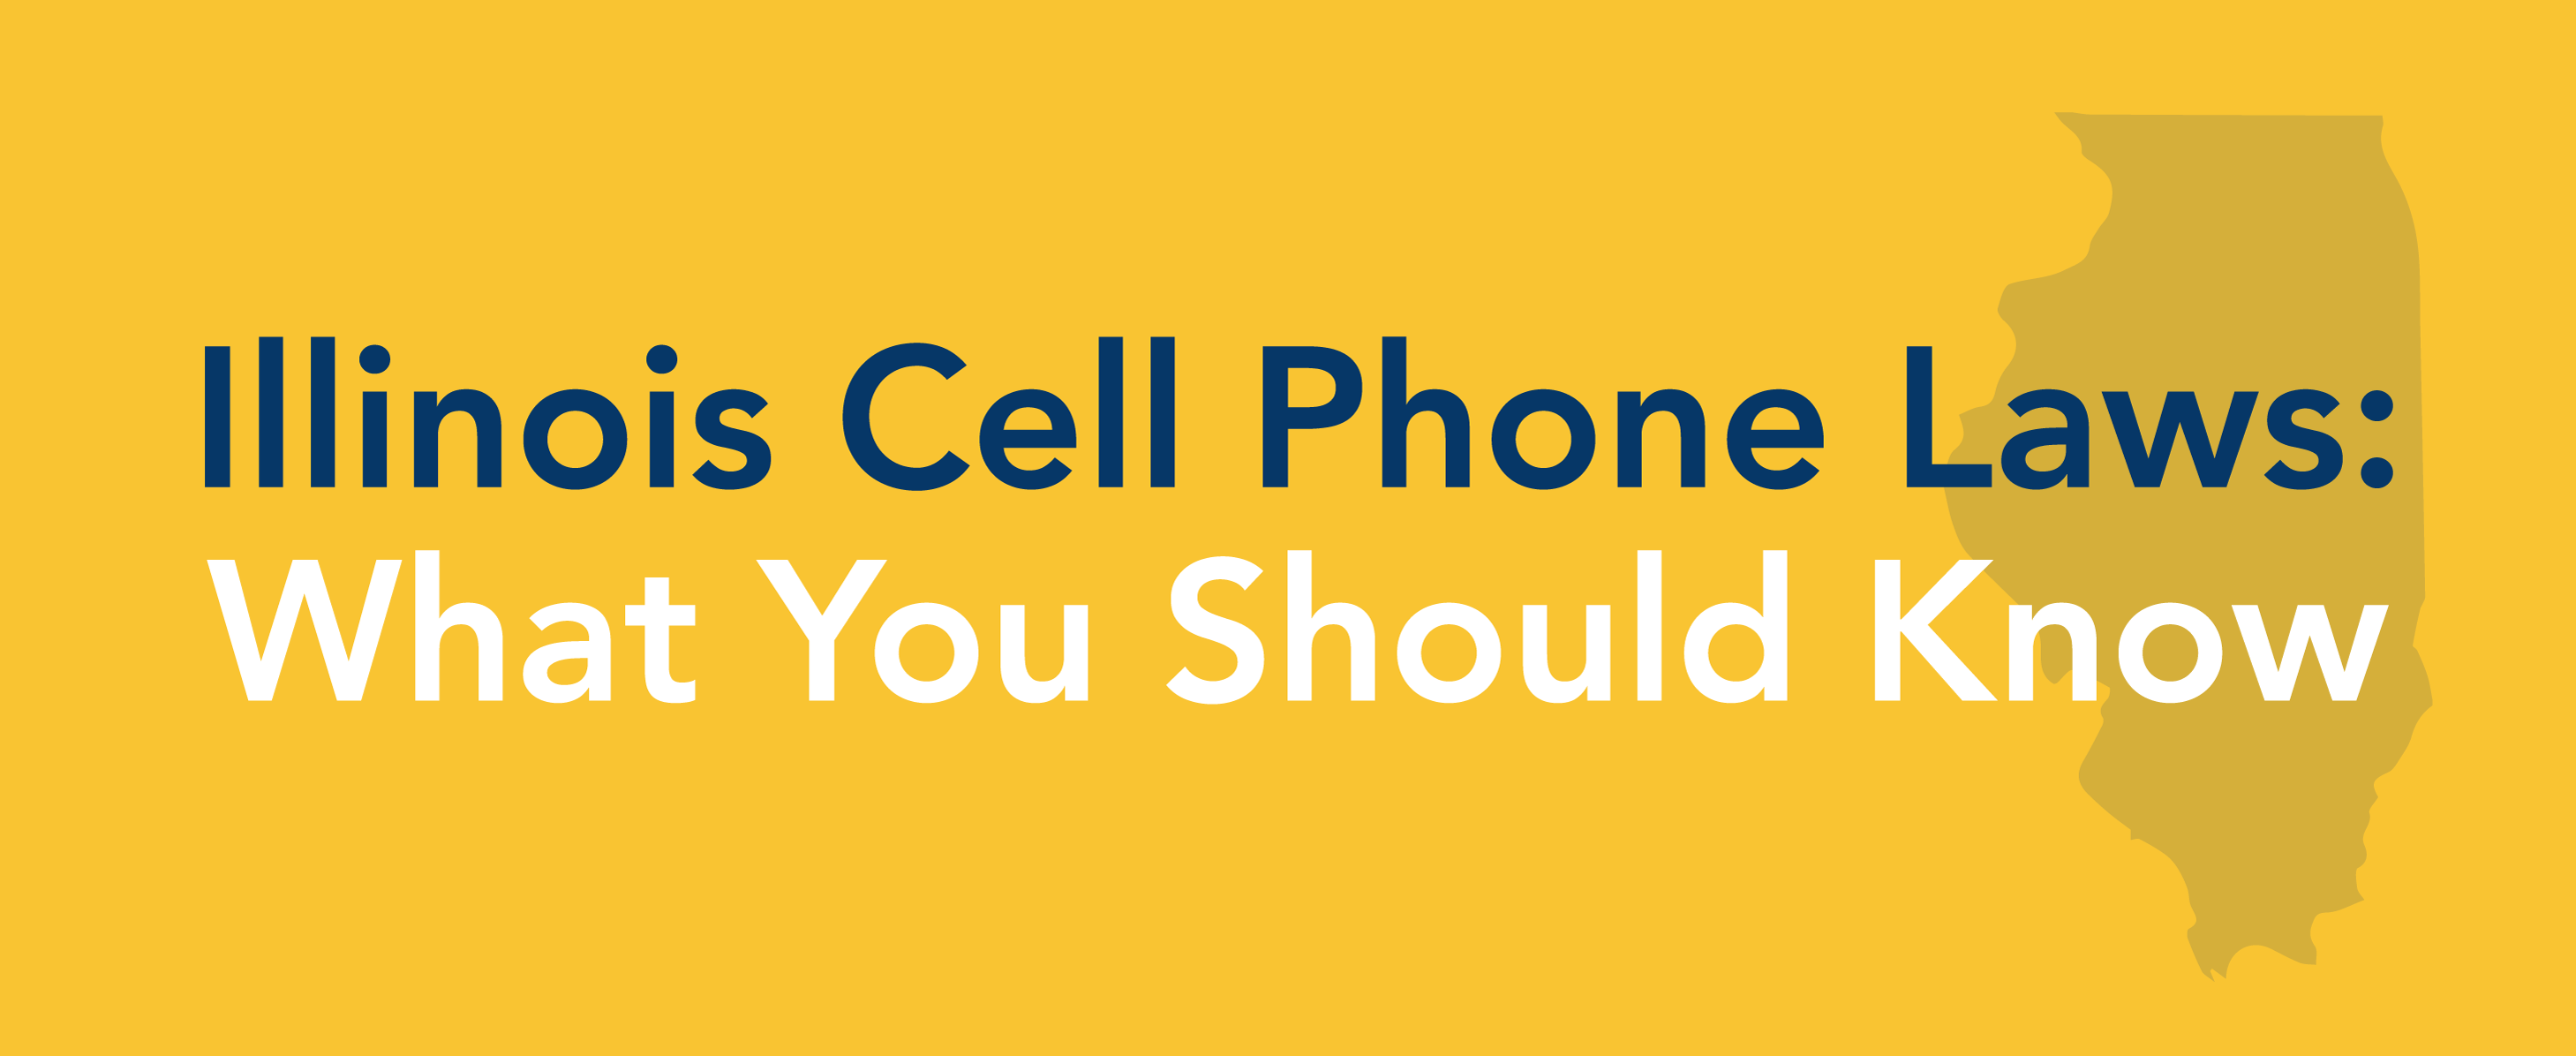 illinois cell phone laws graphic